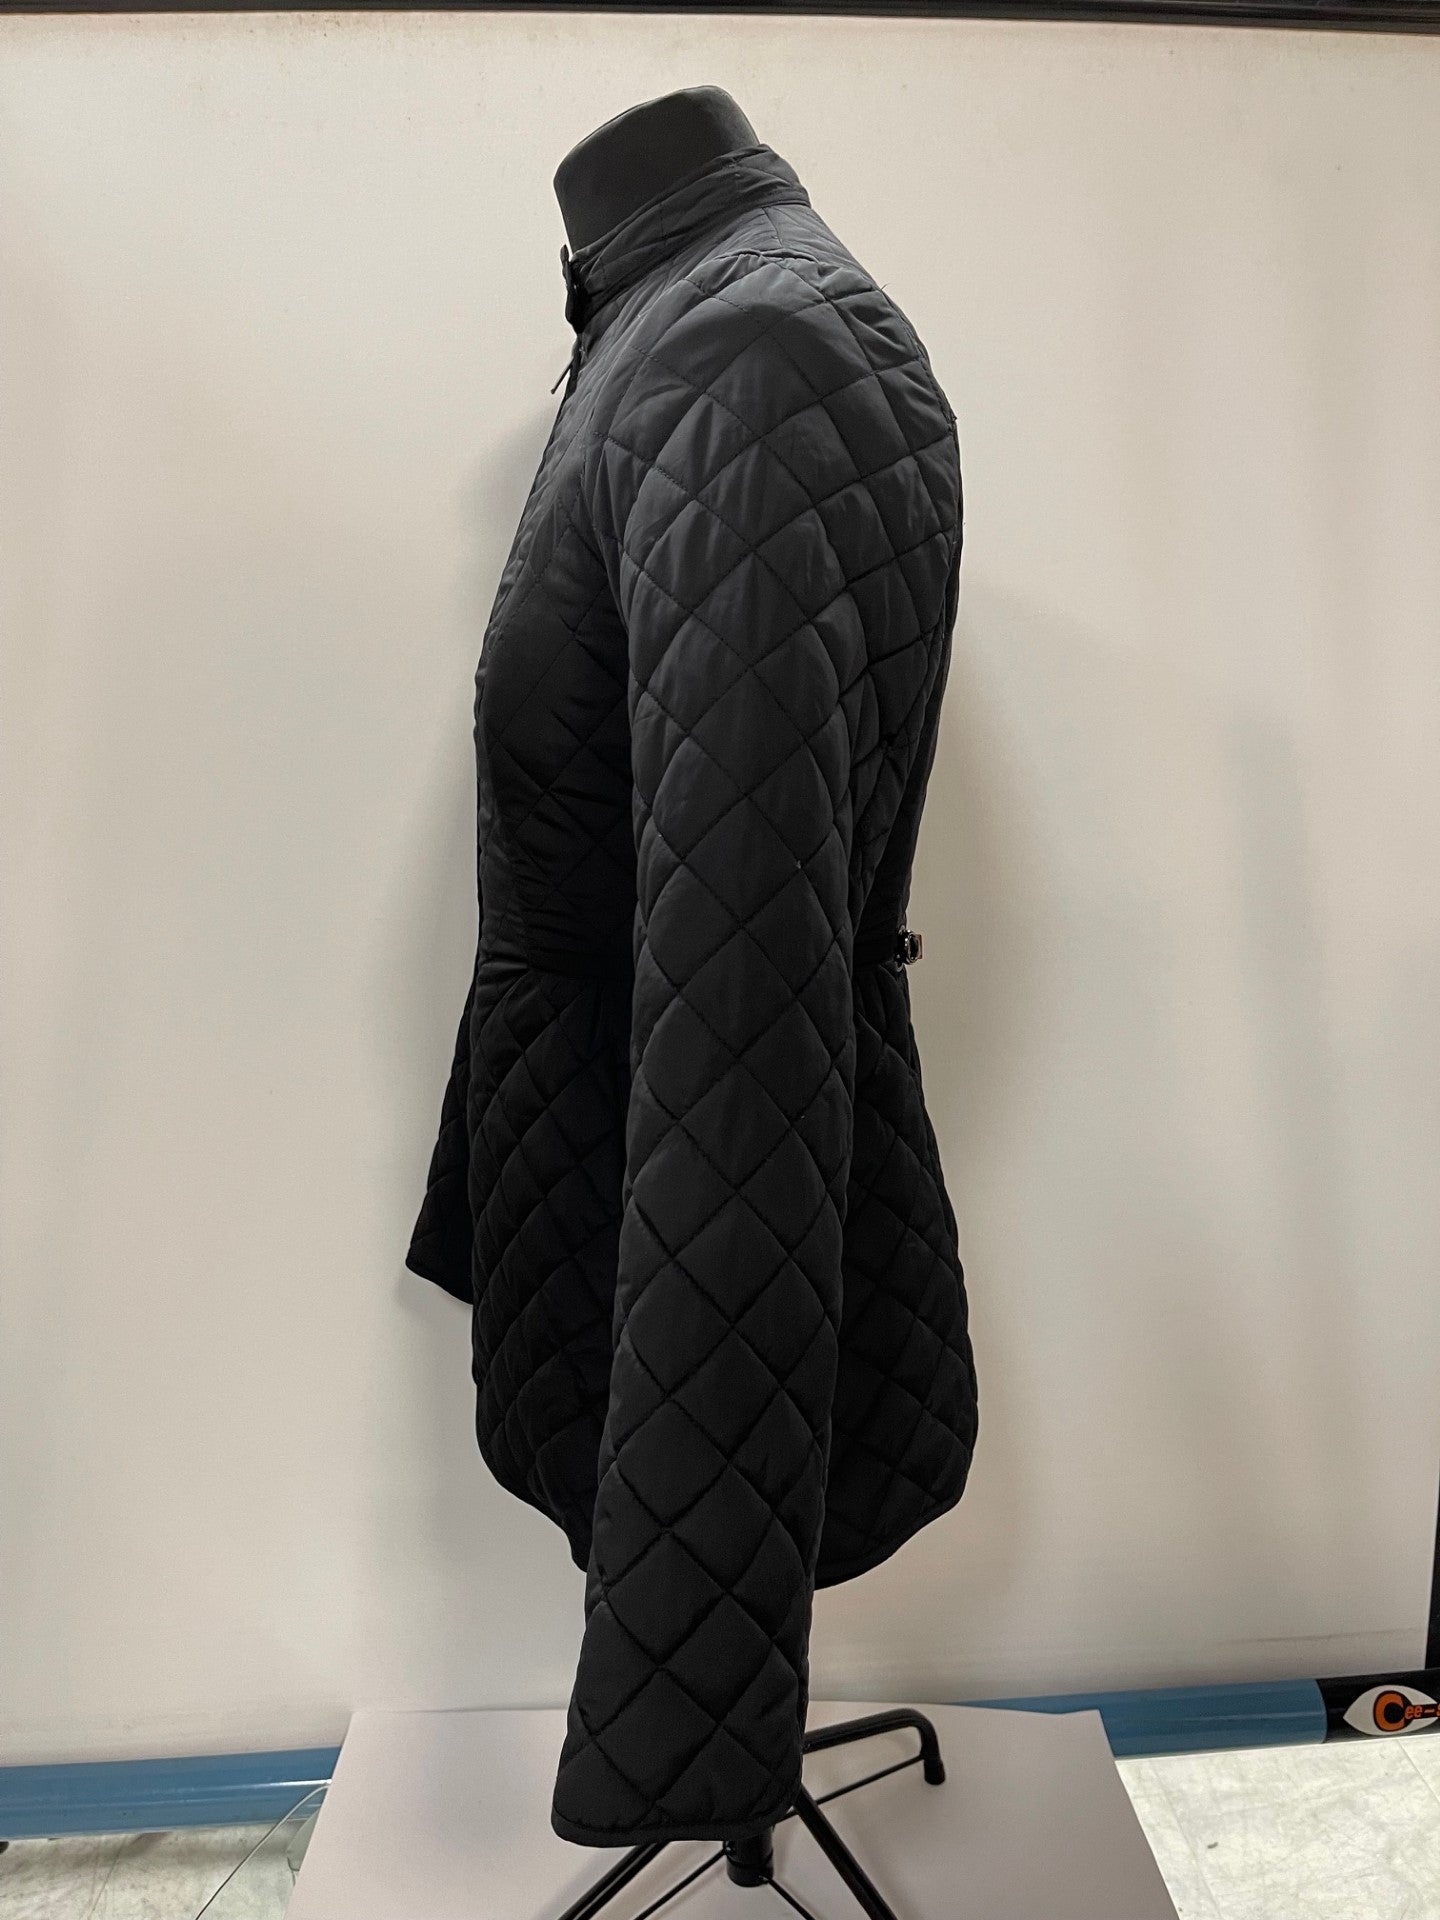 Hobbs Black Quilted Jacket Size 10